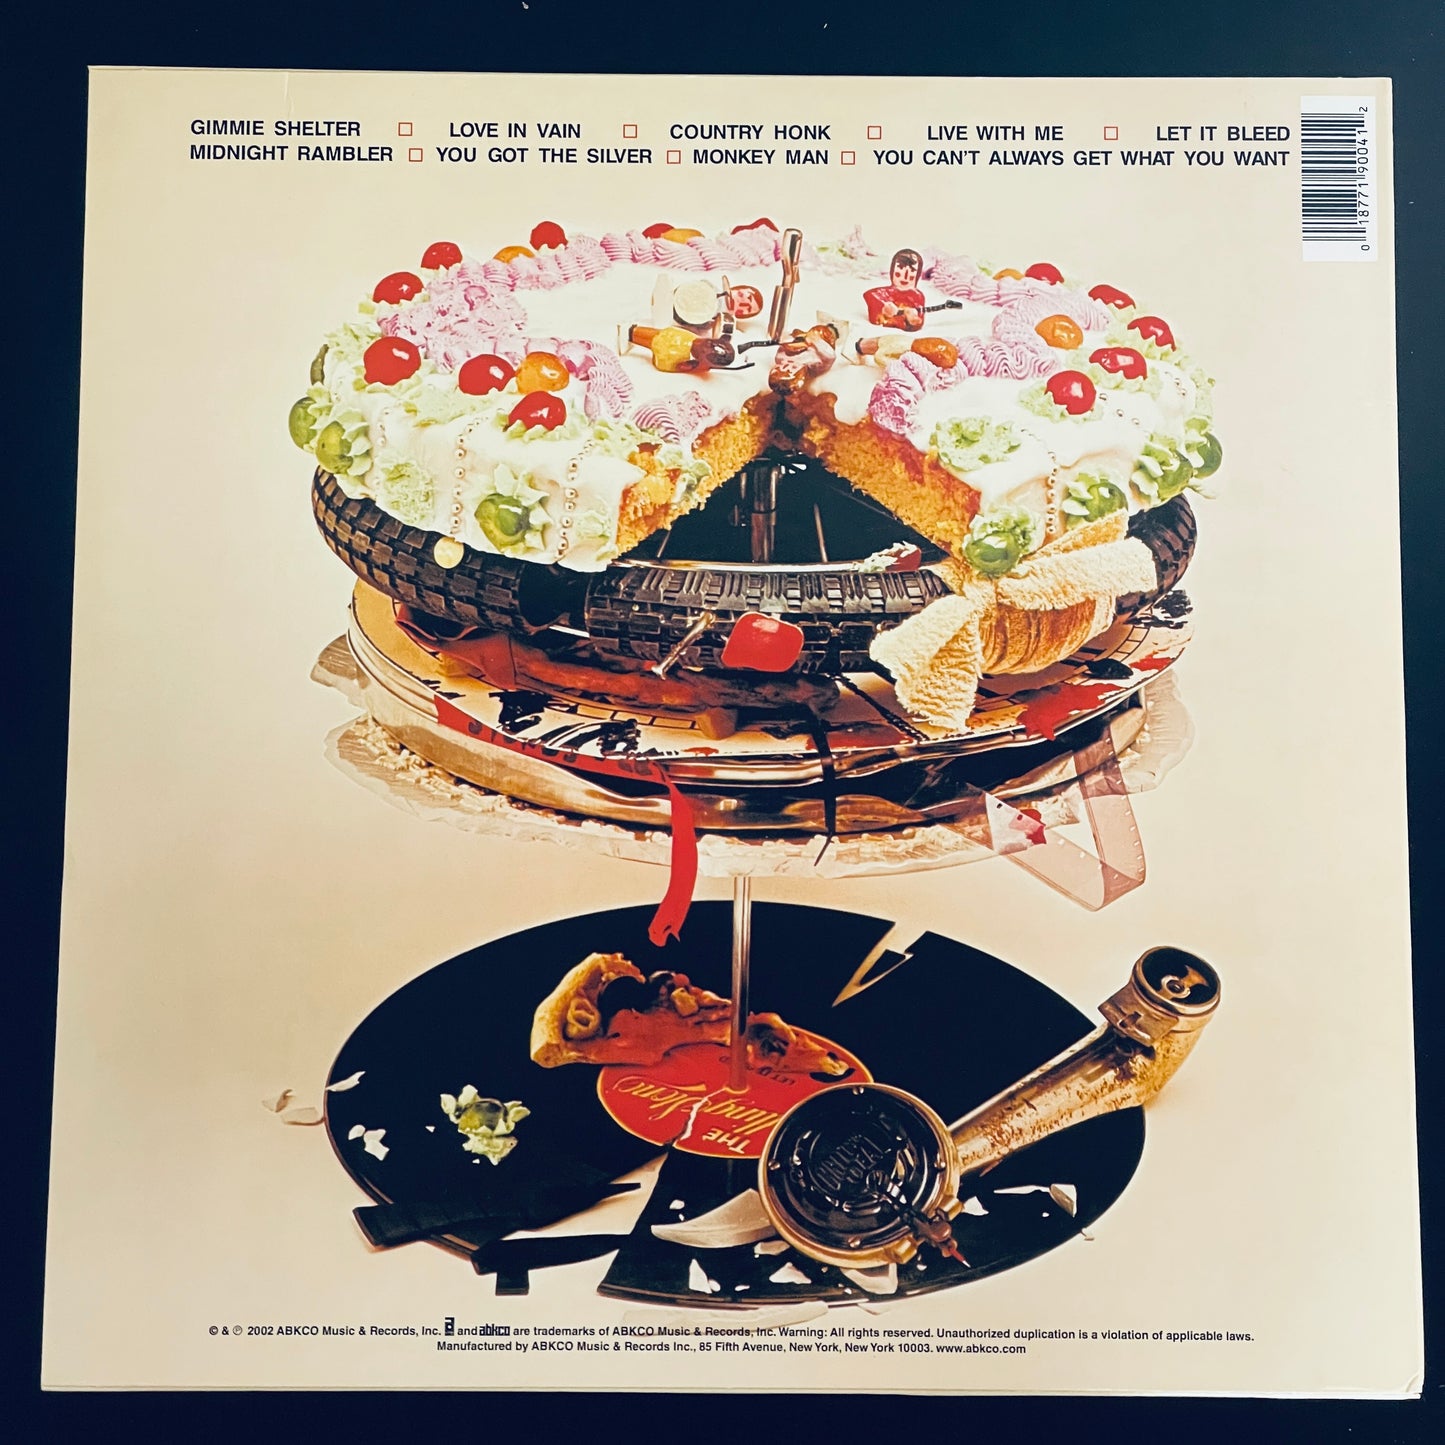 The Rolling Stones - Let It Bleed LP (used)